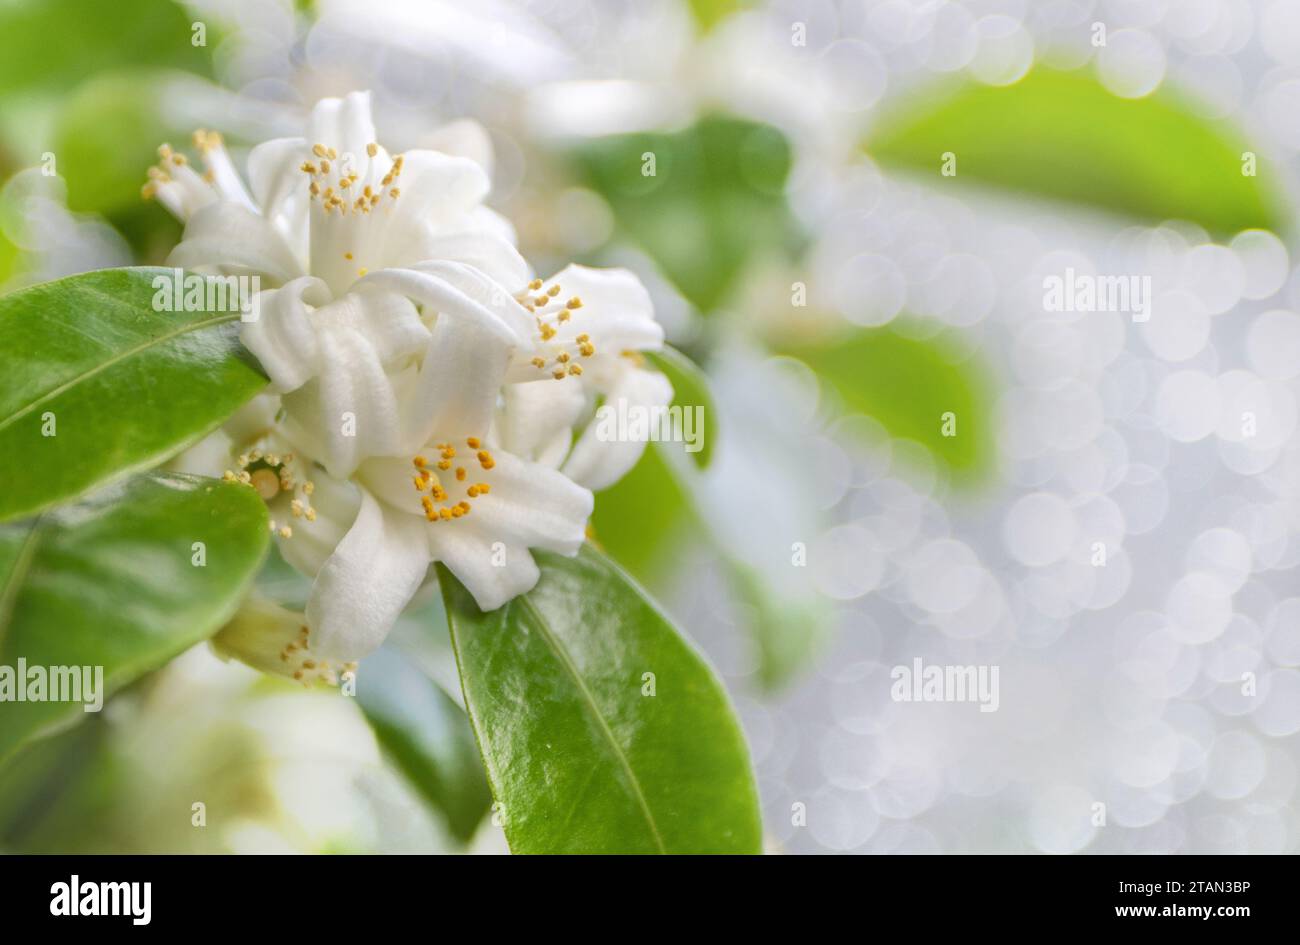 Orange tree white flowers and buds bunch. Calamondin blossom on the blurred bokeh background. Stock Photo